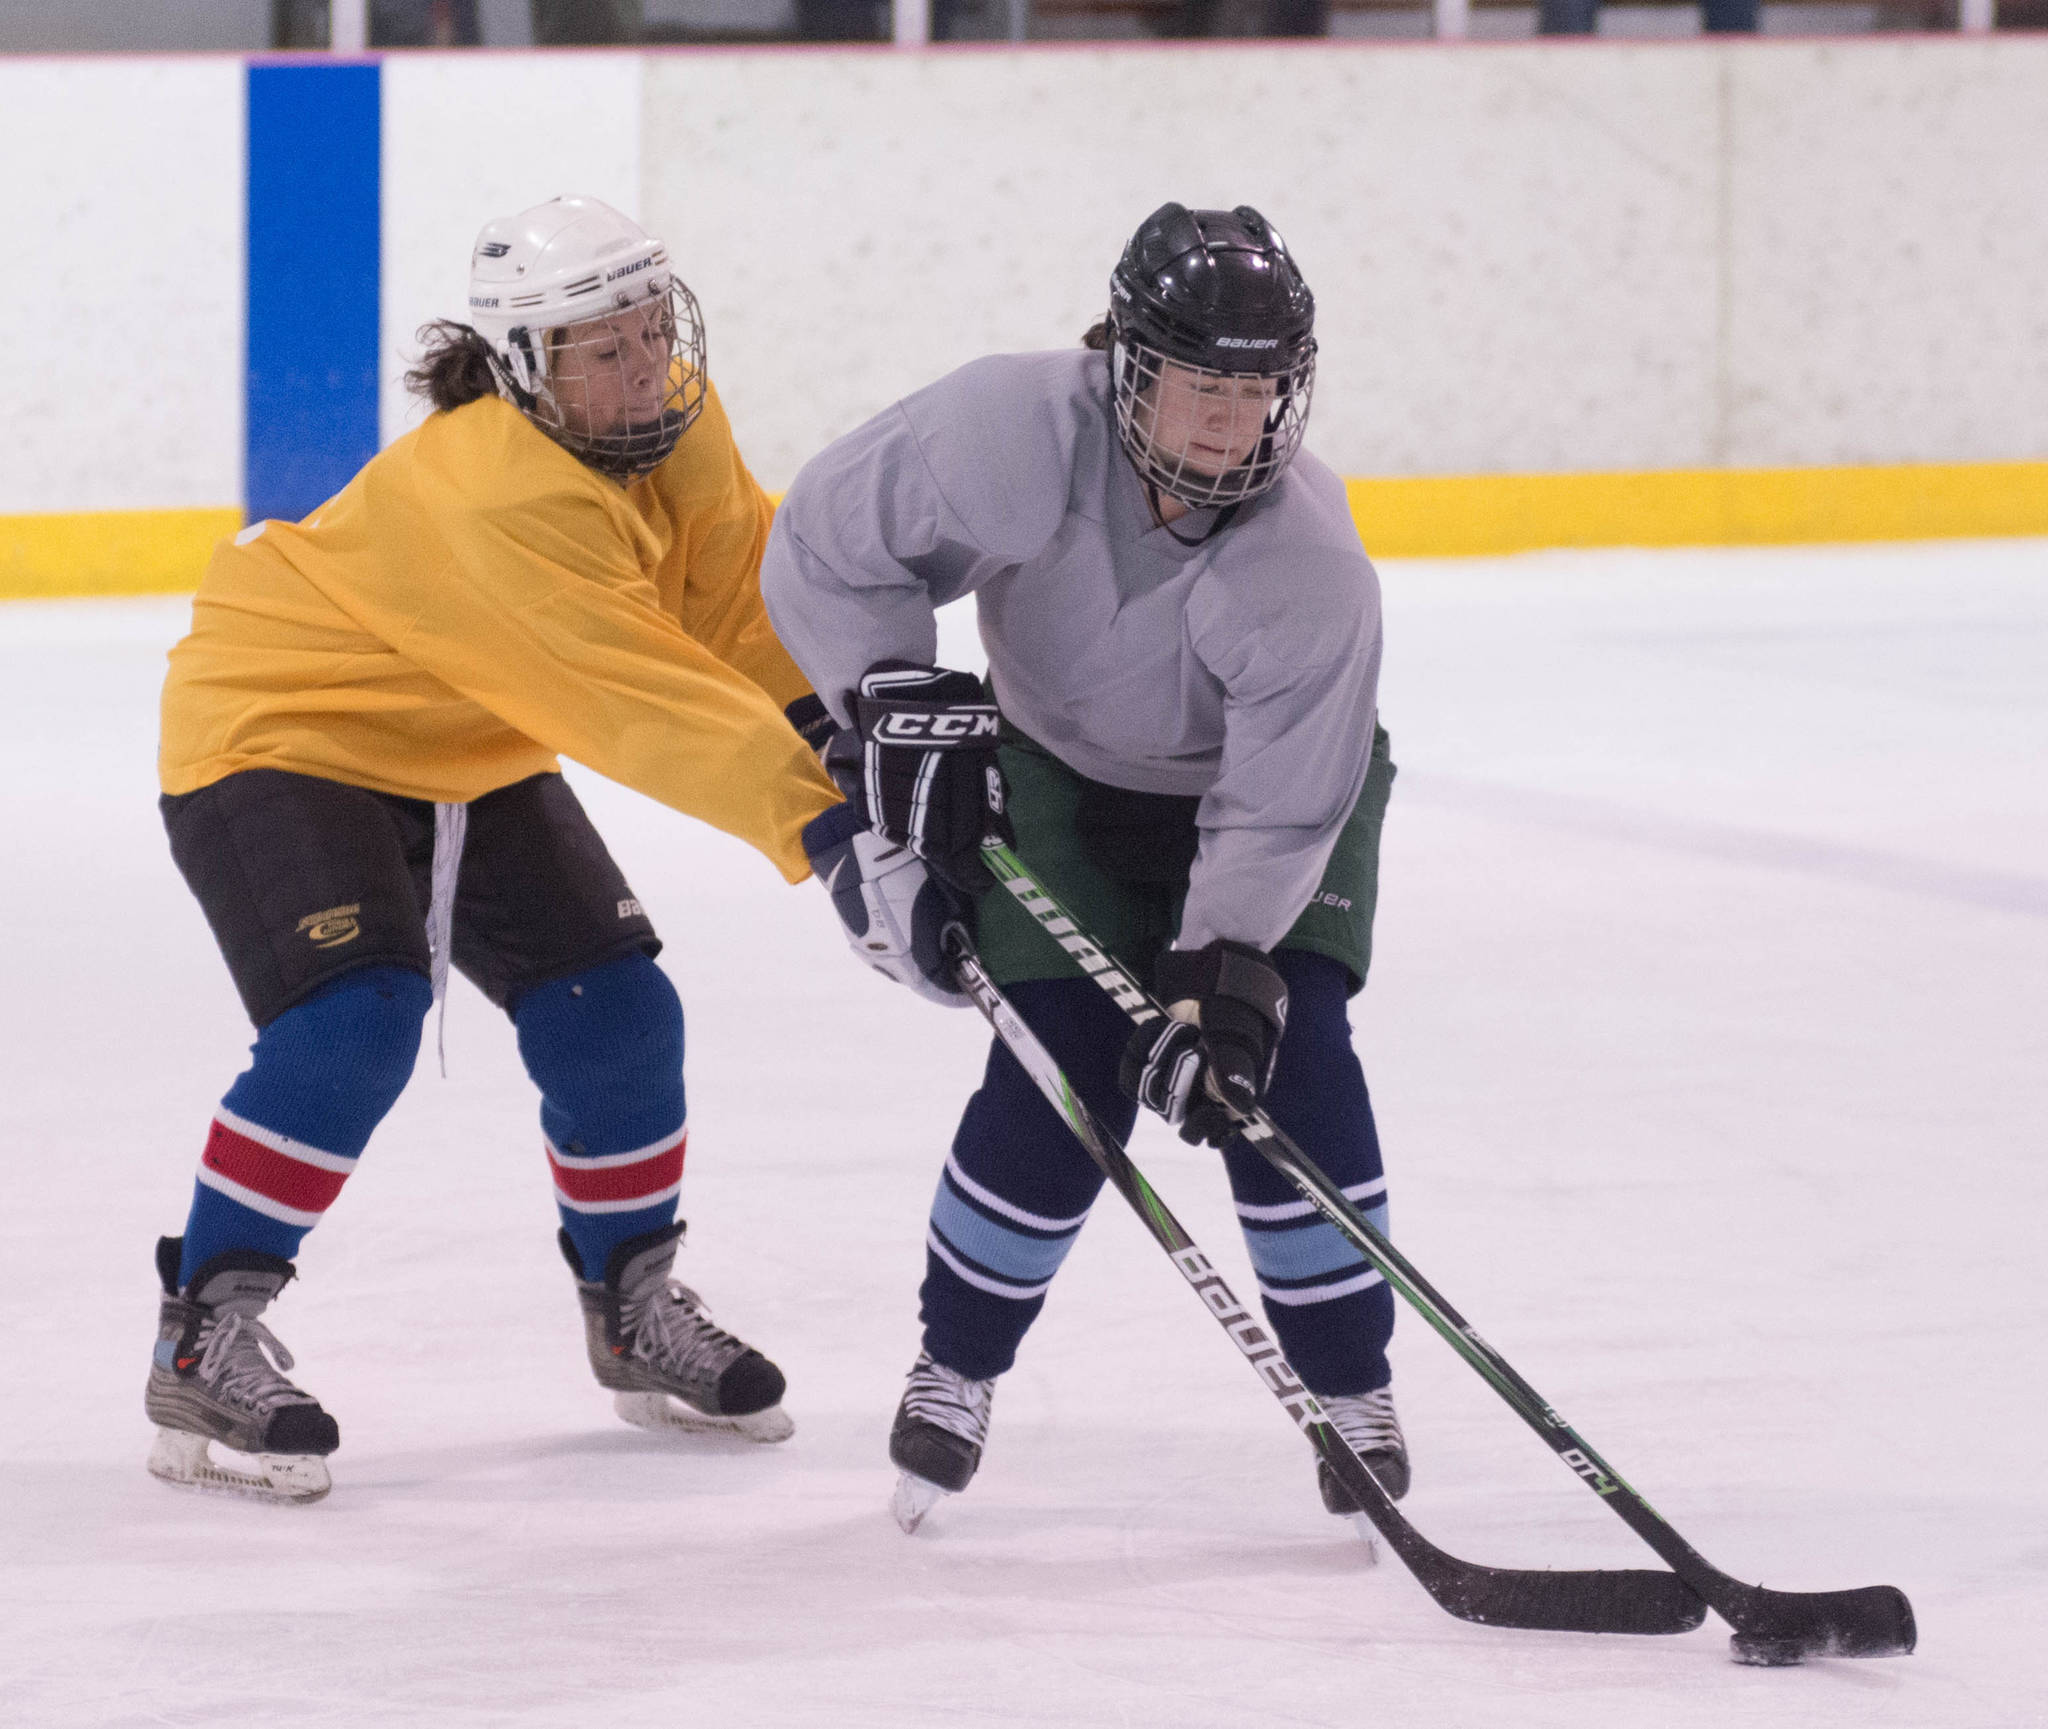 Dawn Welton (yellow) sneaks in front of Mo Miller to regain control of the puck during last year’s Juneau Jamboree at Treadwell Ice Arena. (Photo courtesy of Steve Quinn)